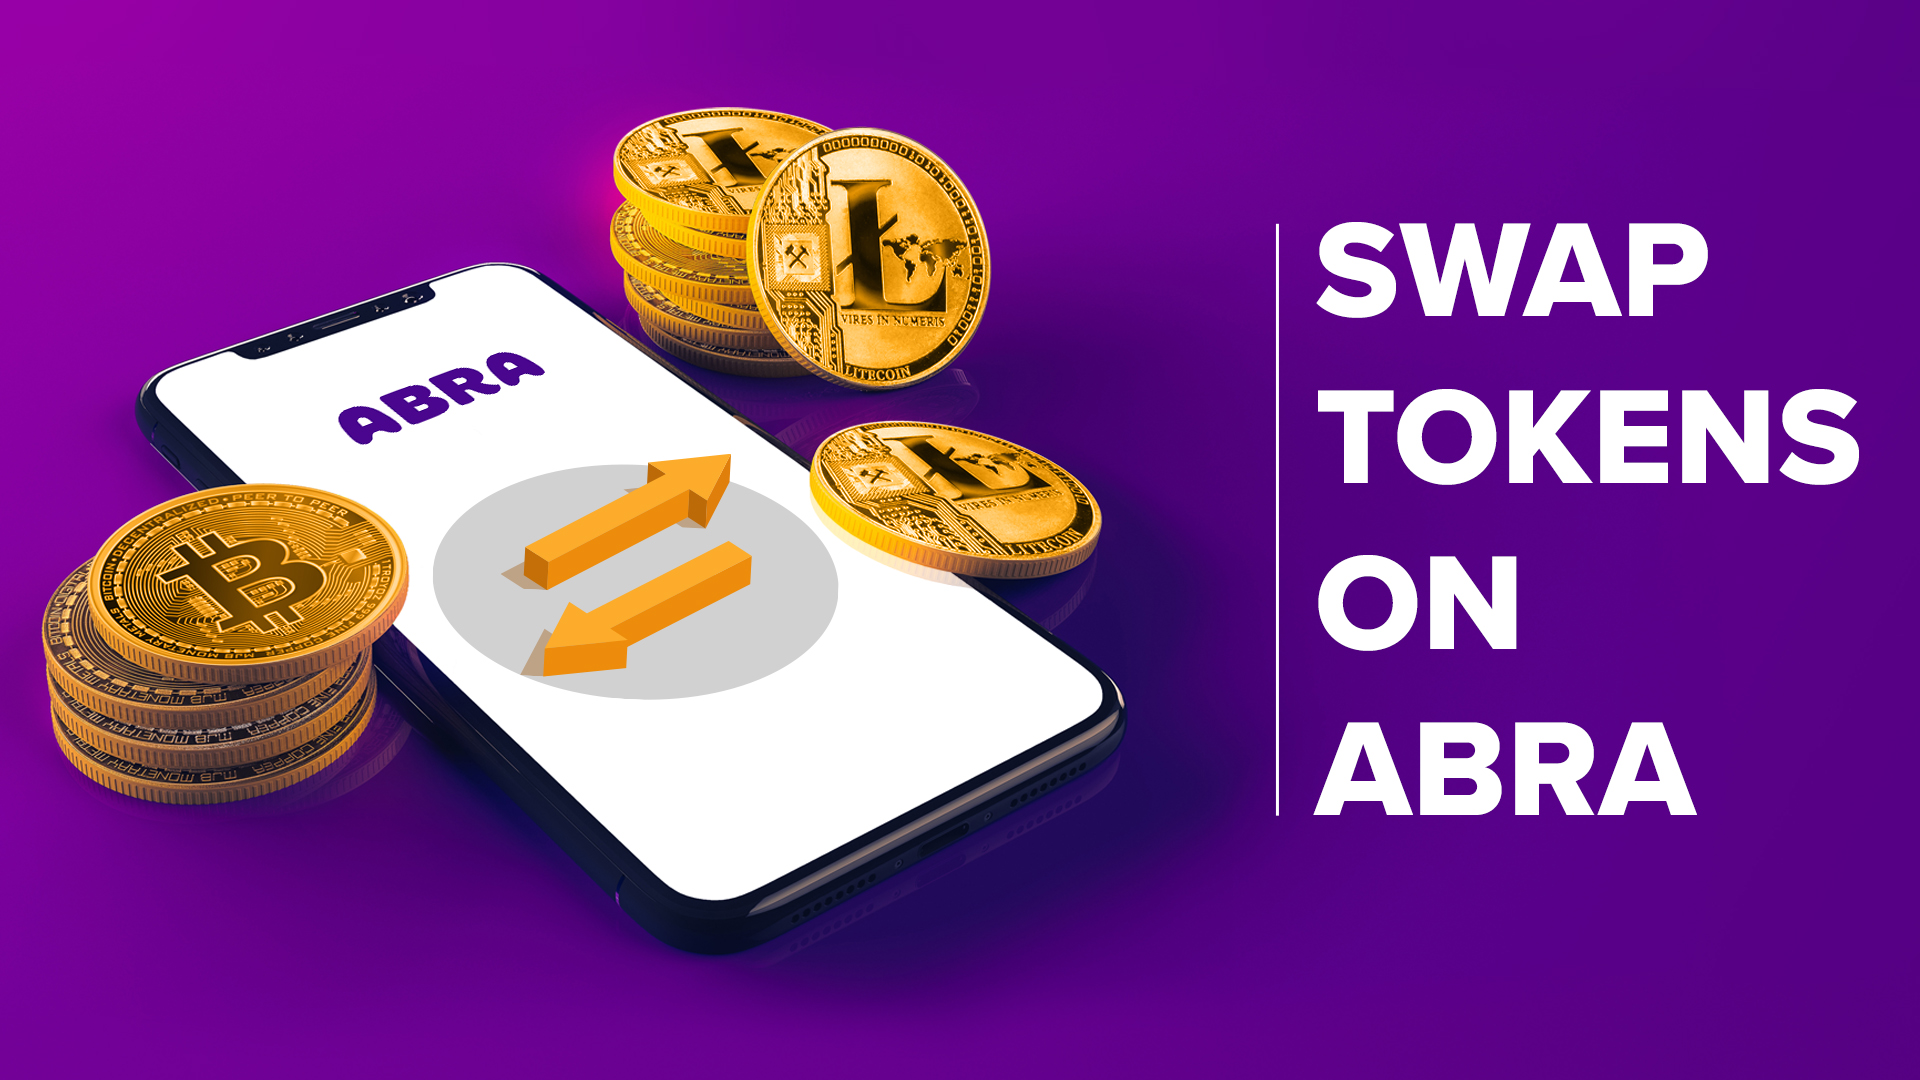 Abra token cryptocurrency blockchain info does not allow buuying btc